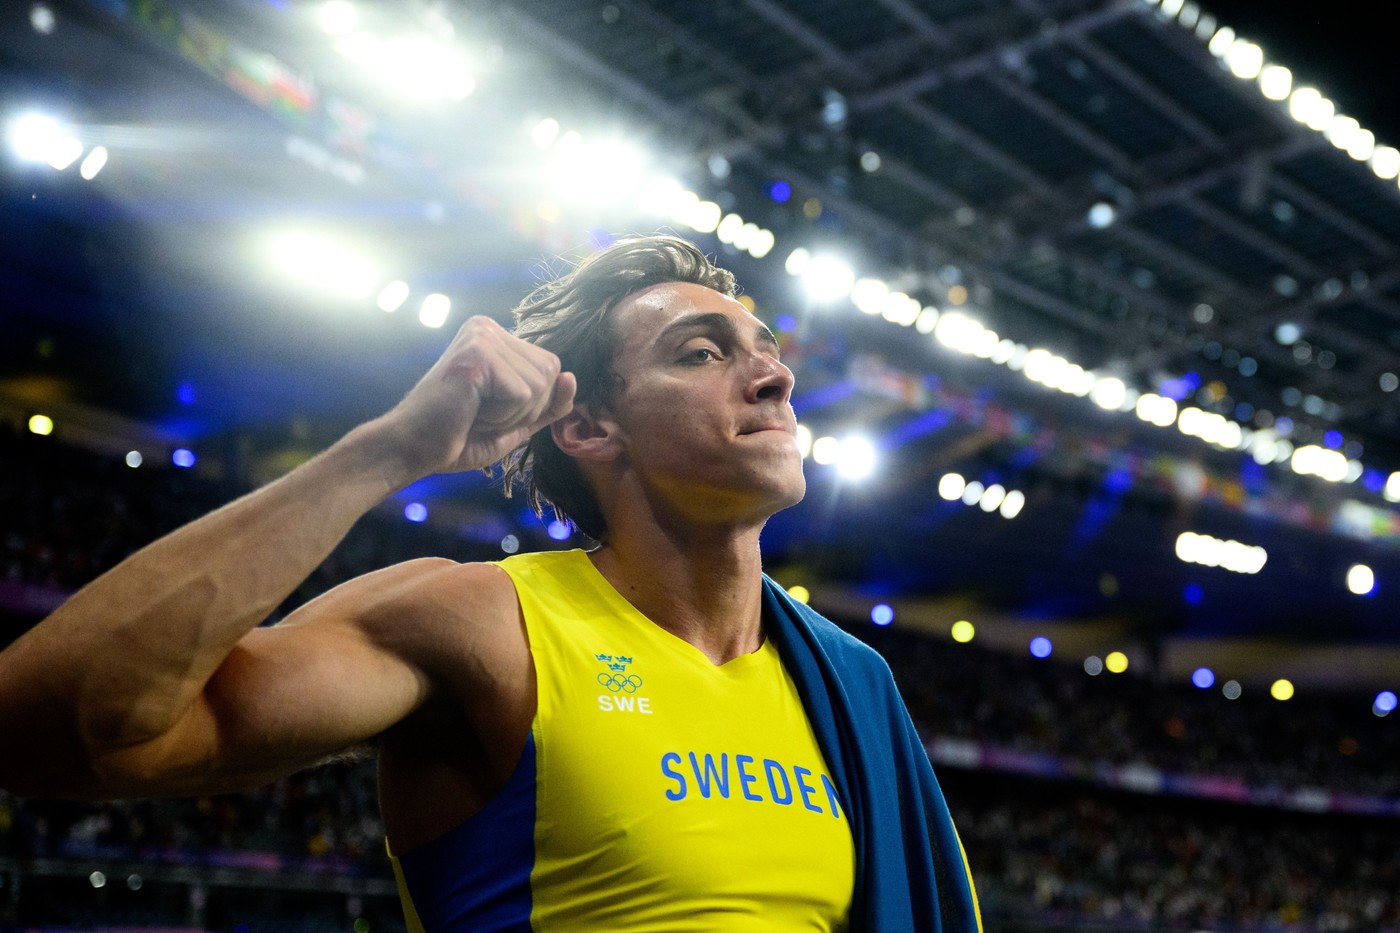 Armand Duplantis of Sweden celebrates after clearing 6,25 meters in men's athletics pole vault final and setting a new world record during day 10 of the Paris 2024 Olympic Games on August 5, 2024 in Paris.
Paris 2024 Olympics, Day 10, Athletics, France - 05 Aug 2024,Image: 896313599, License: Rights-managed, Restrictions: , Model Release: no